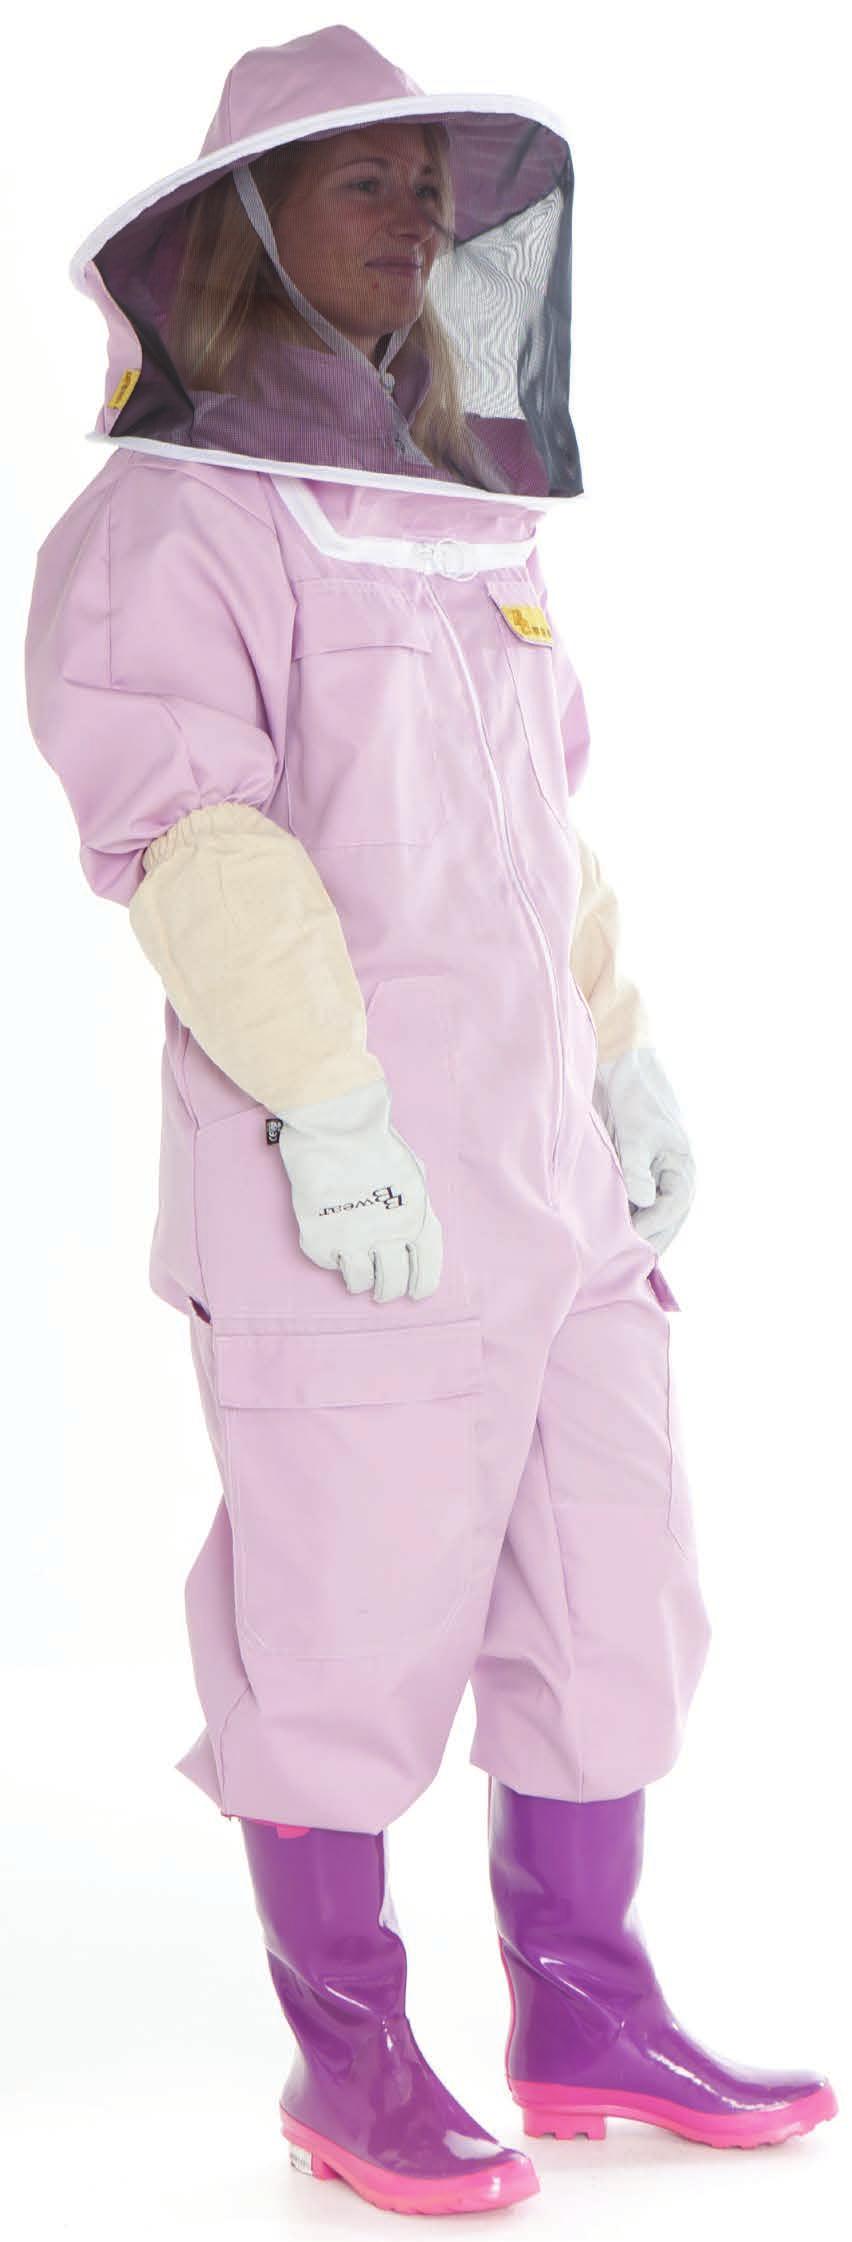 Deluxe Retro Full Suit Colour - Pink Colour - Biscuit For those beekeepers who want a deluxe suit, but